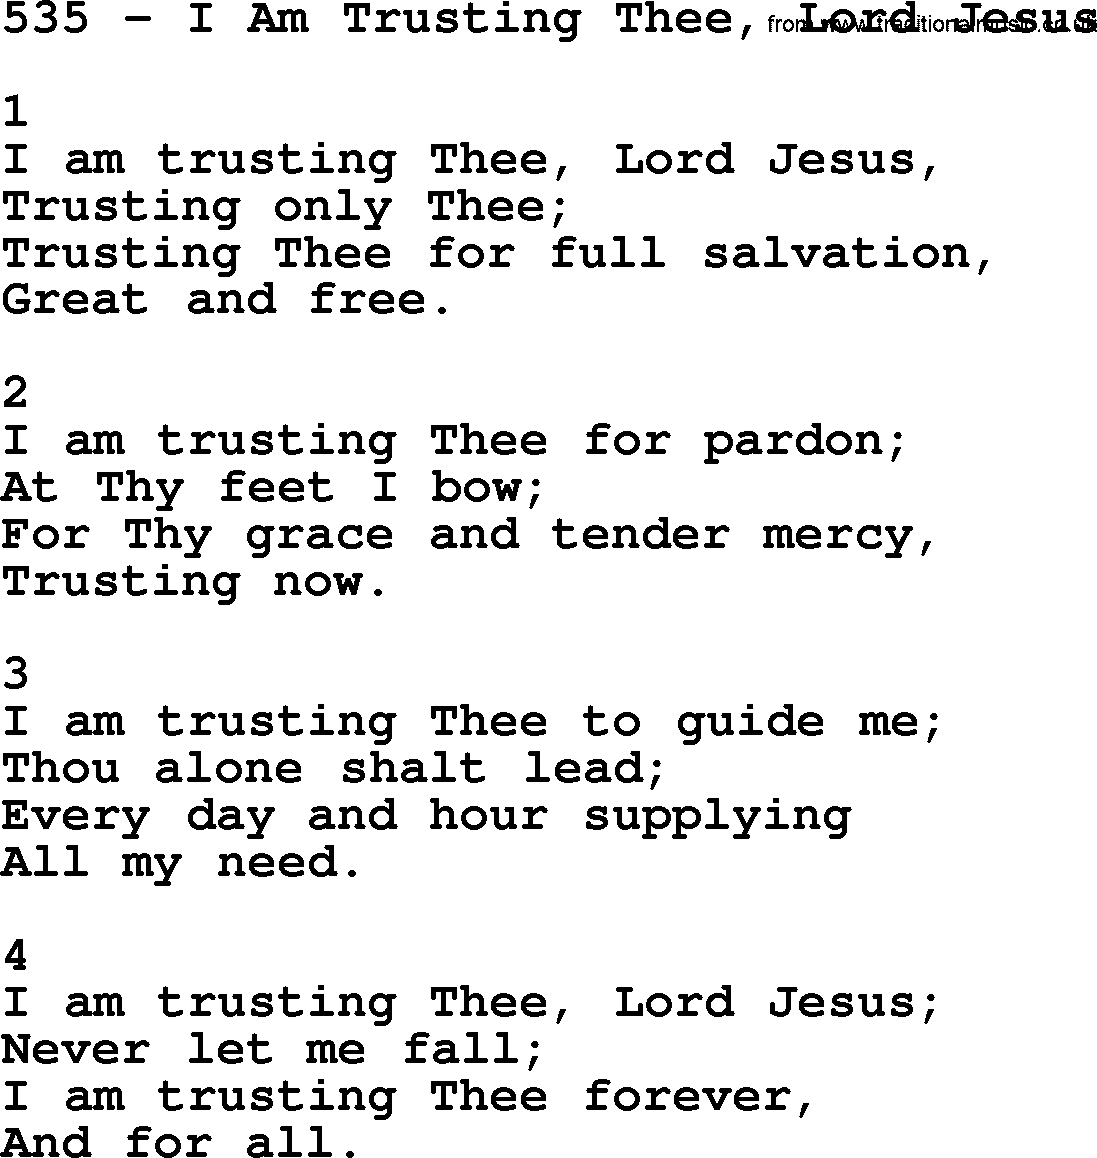 Adventist Hymnal, Song: 535-I Am Trusting Thee, Lord Jesus, with Lyrics ...